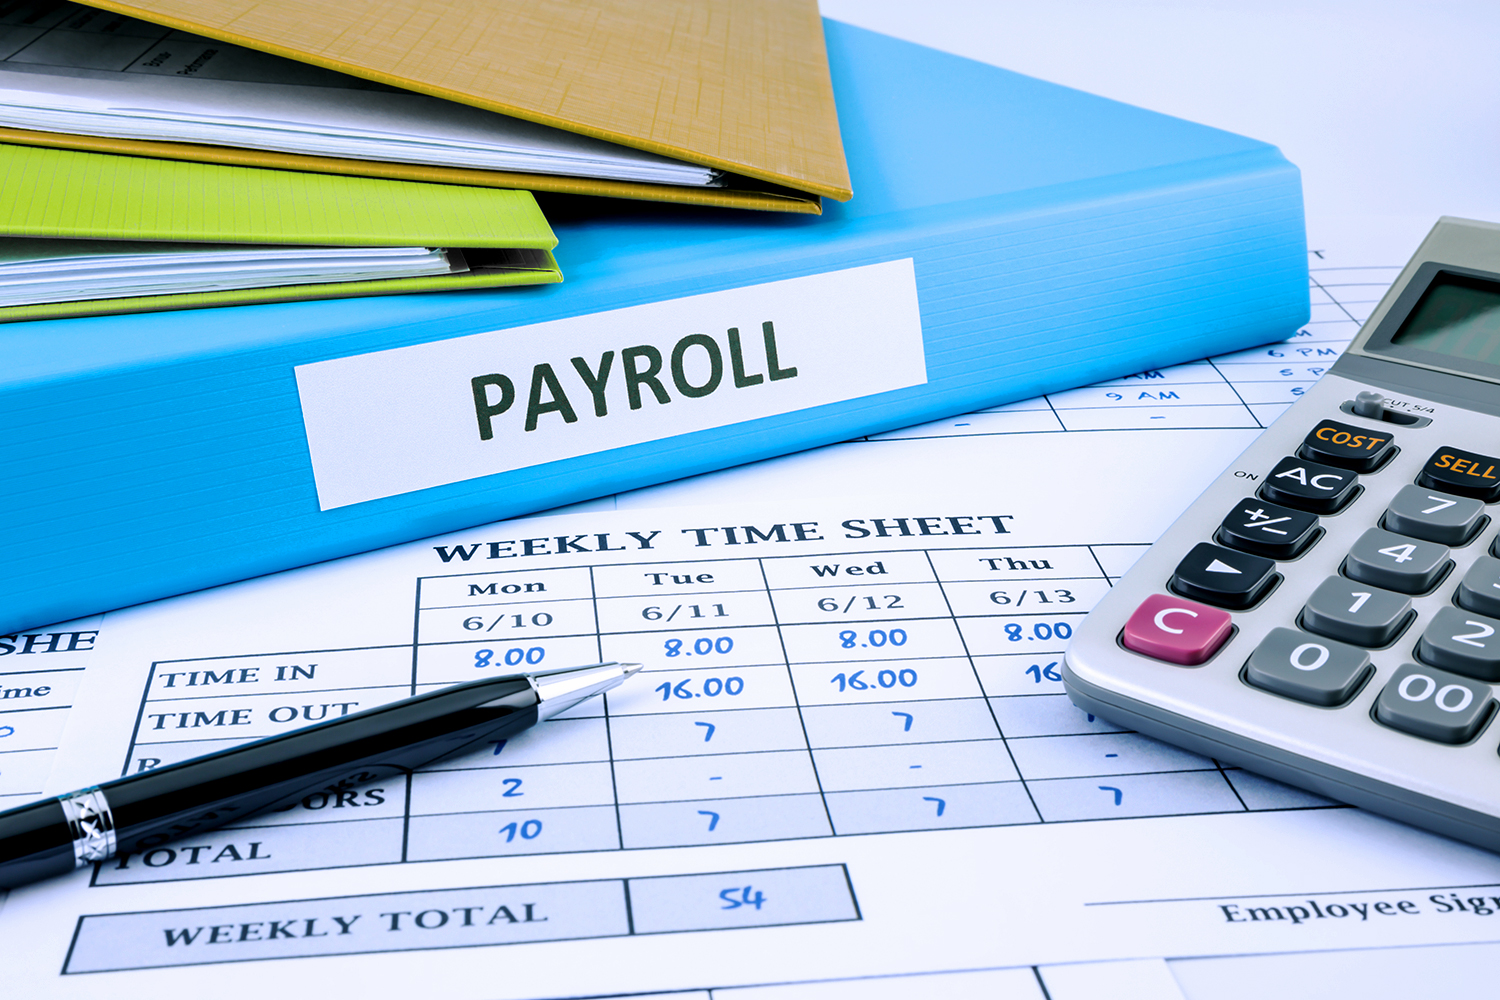 TRAINING ONLINE PAYROLL ADMINISTRATION